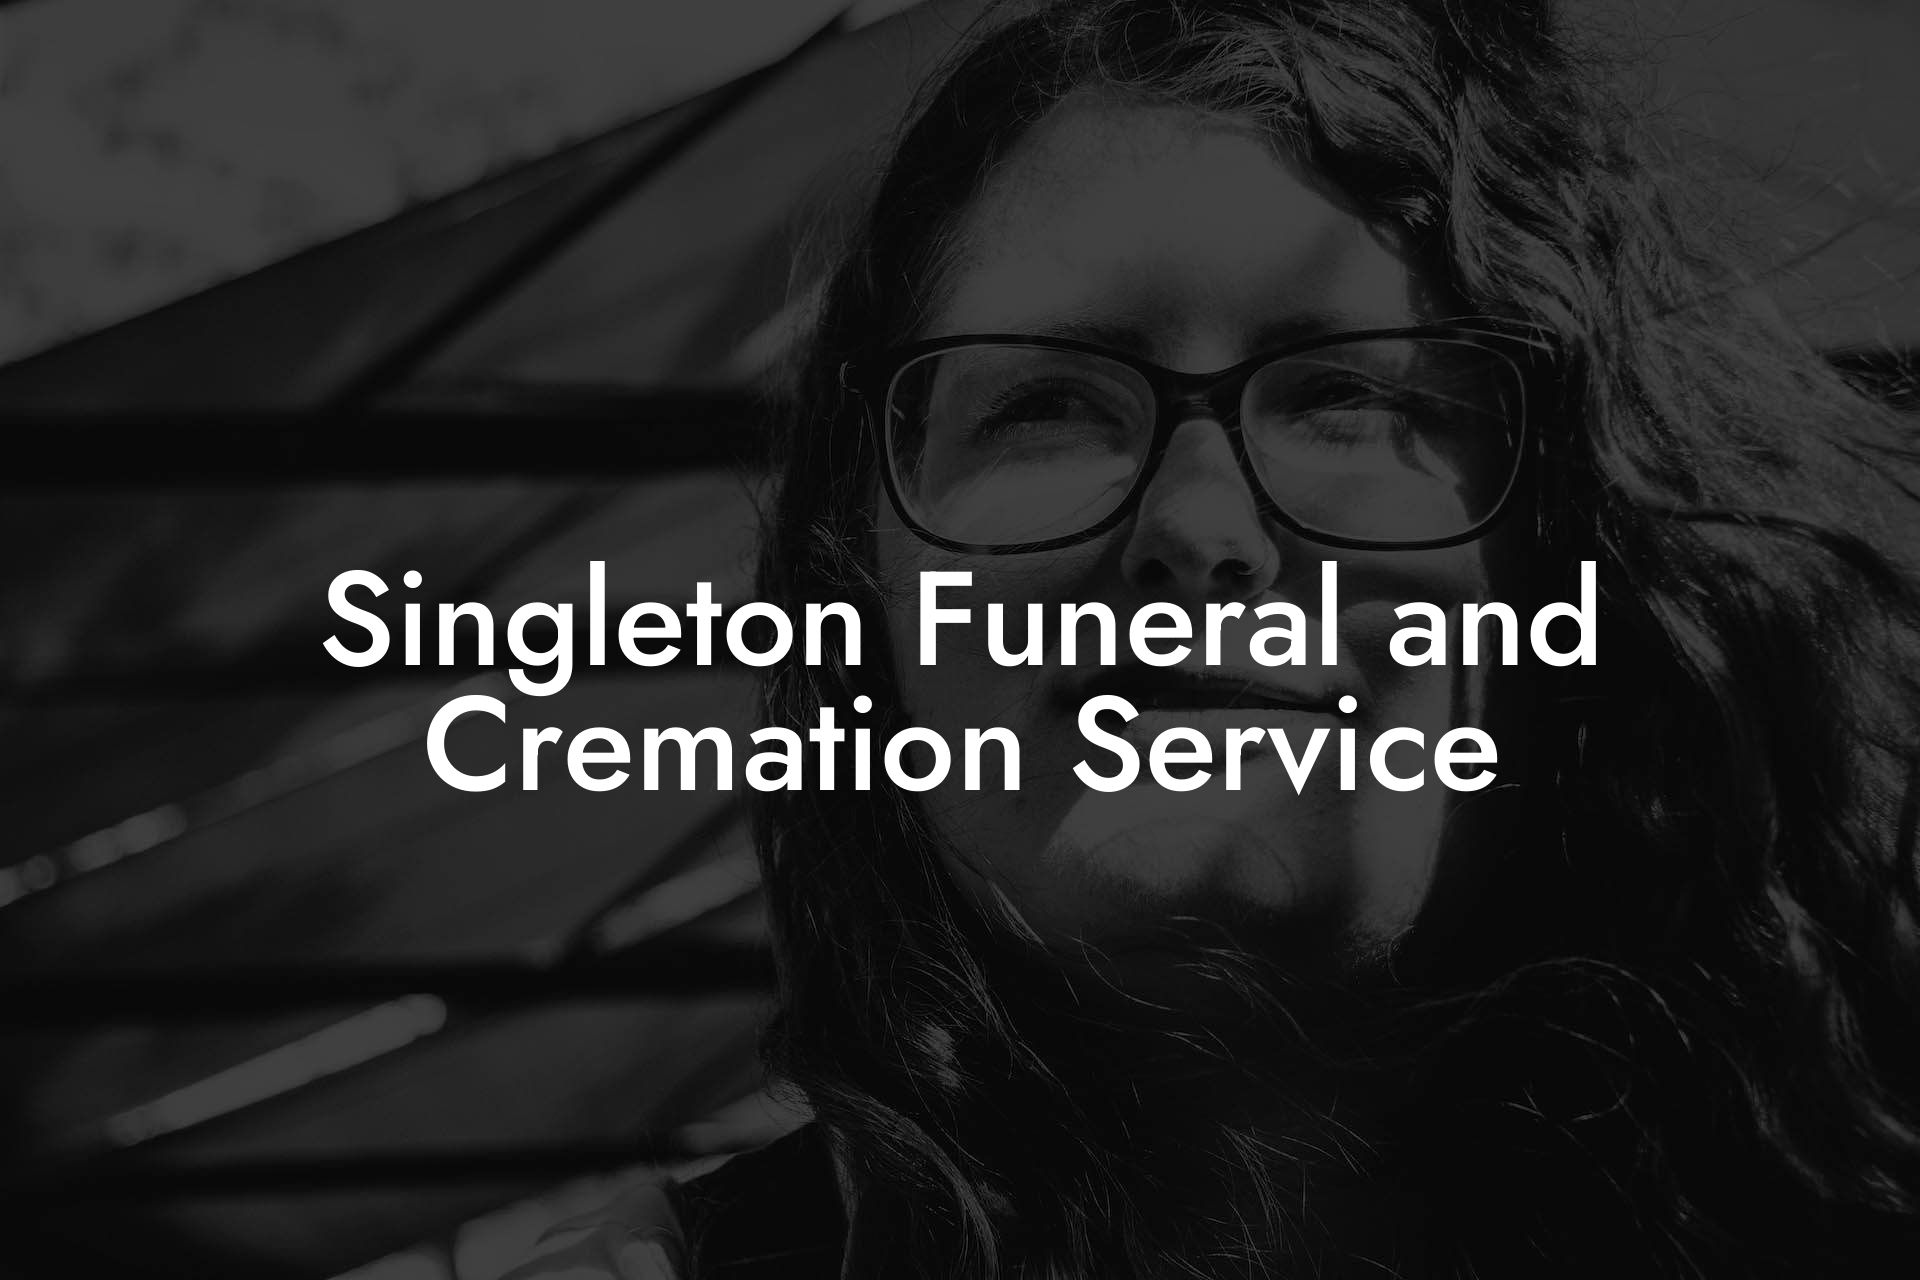 Singleton Funeral and Cremation Service